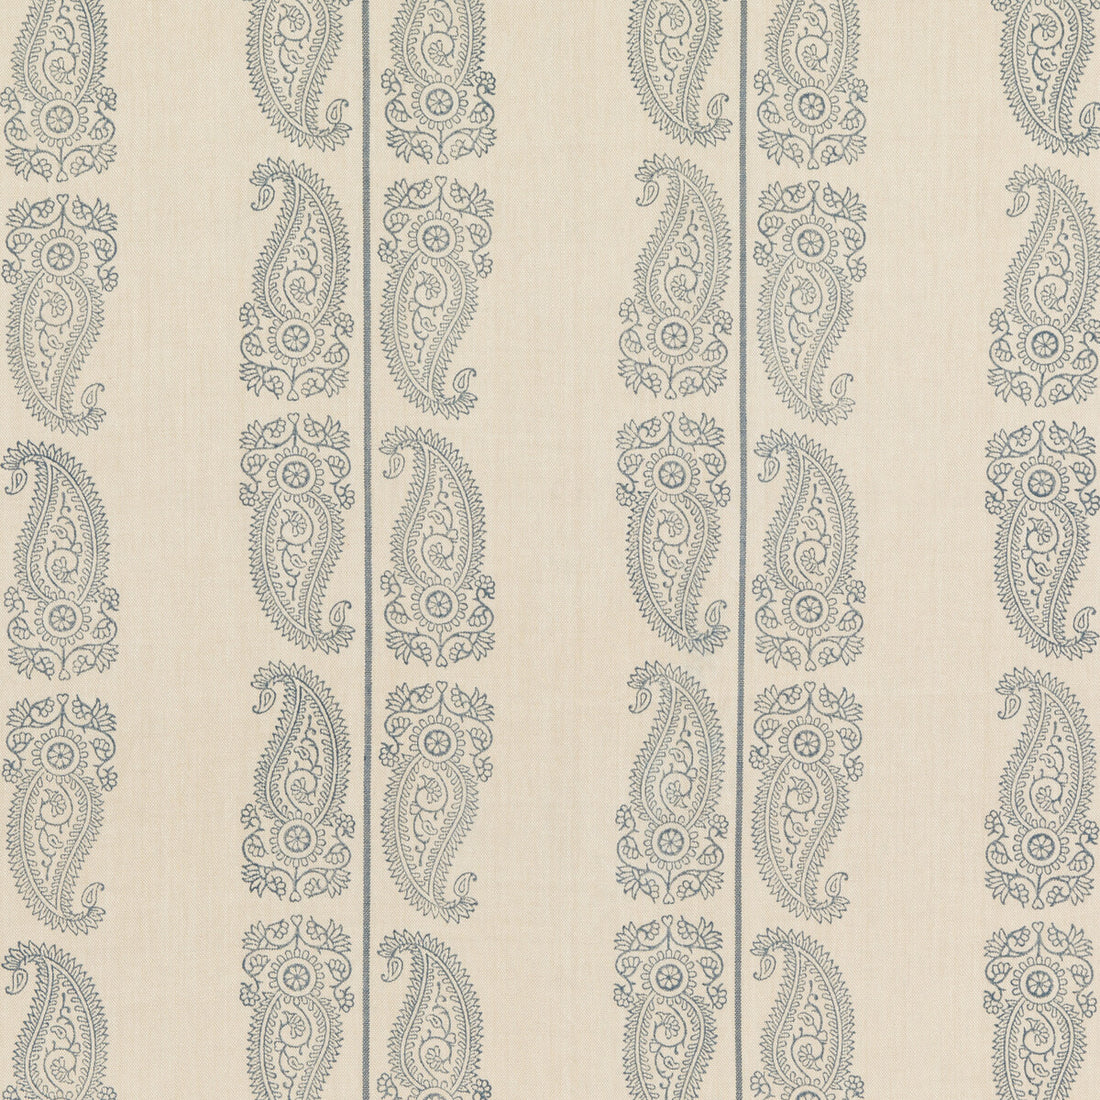 Cromer Paisley fabric in indigo color - pattern BP10796.2.0 - by G P &amp; J Baker in the Artisan II collection